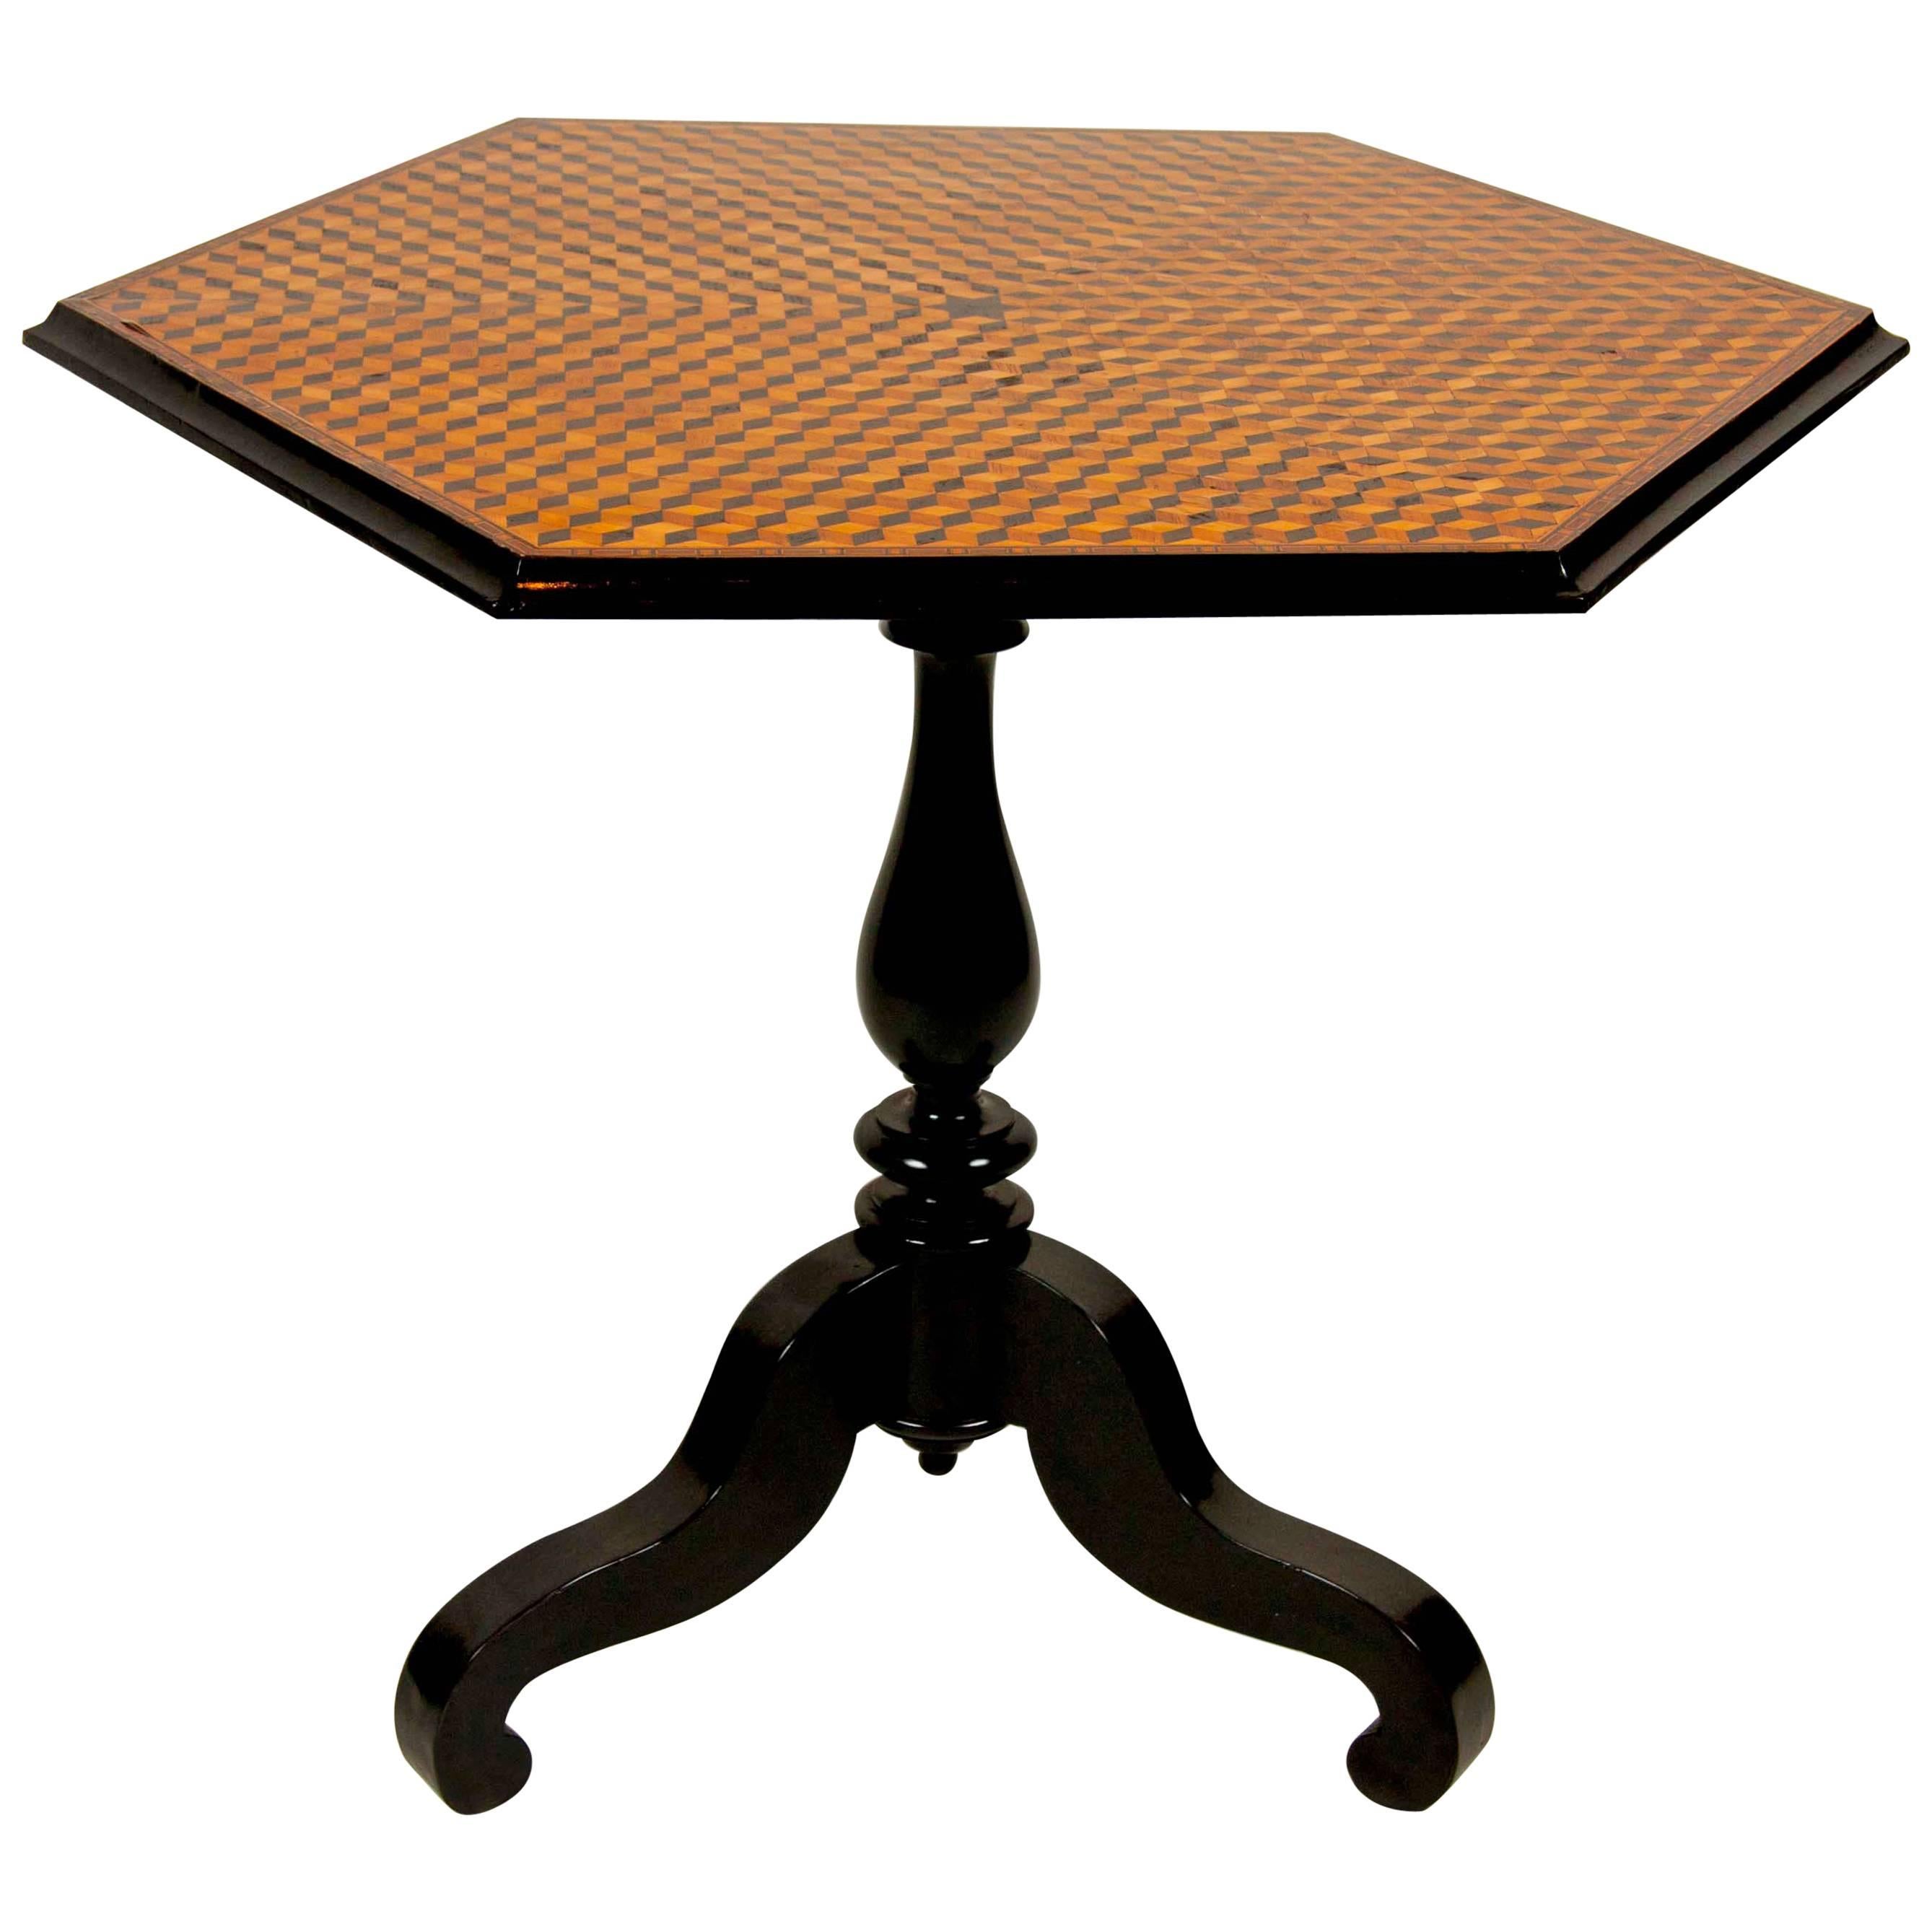 A 19th century American octagonal tilt-top table with ebonized base and cube form inlay. Diameter from point to point = 35.5